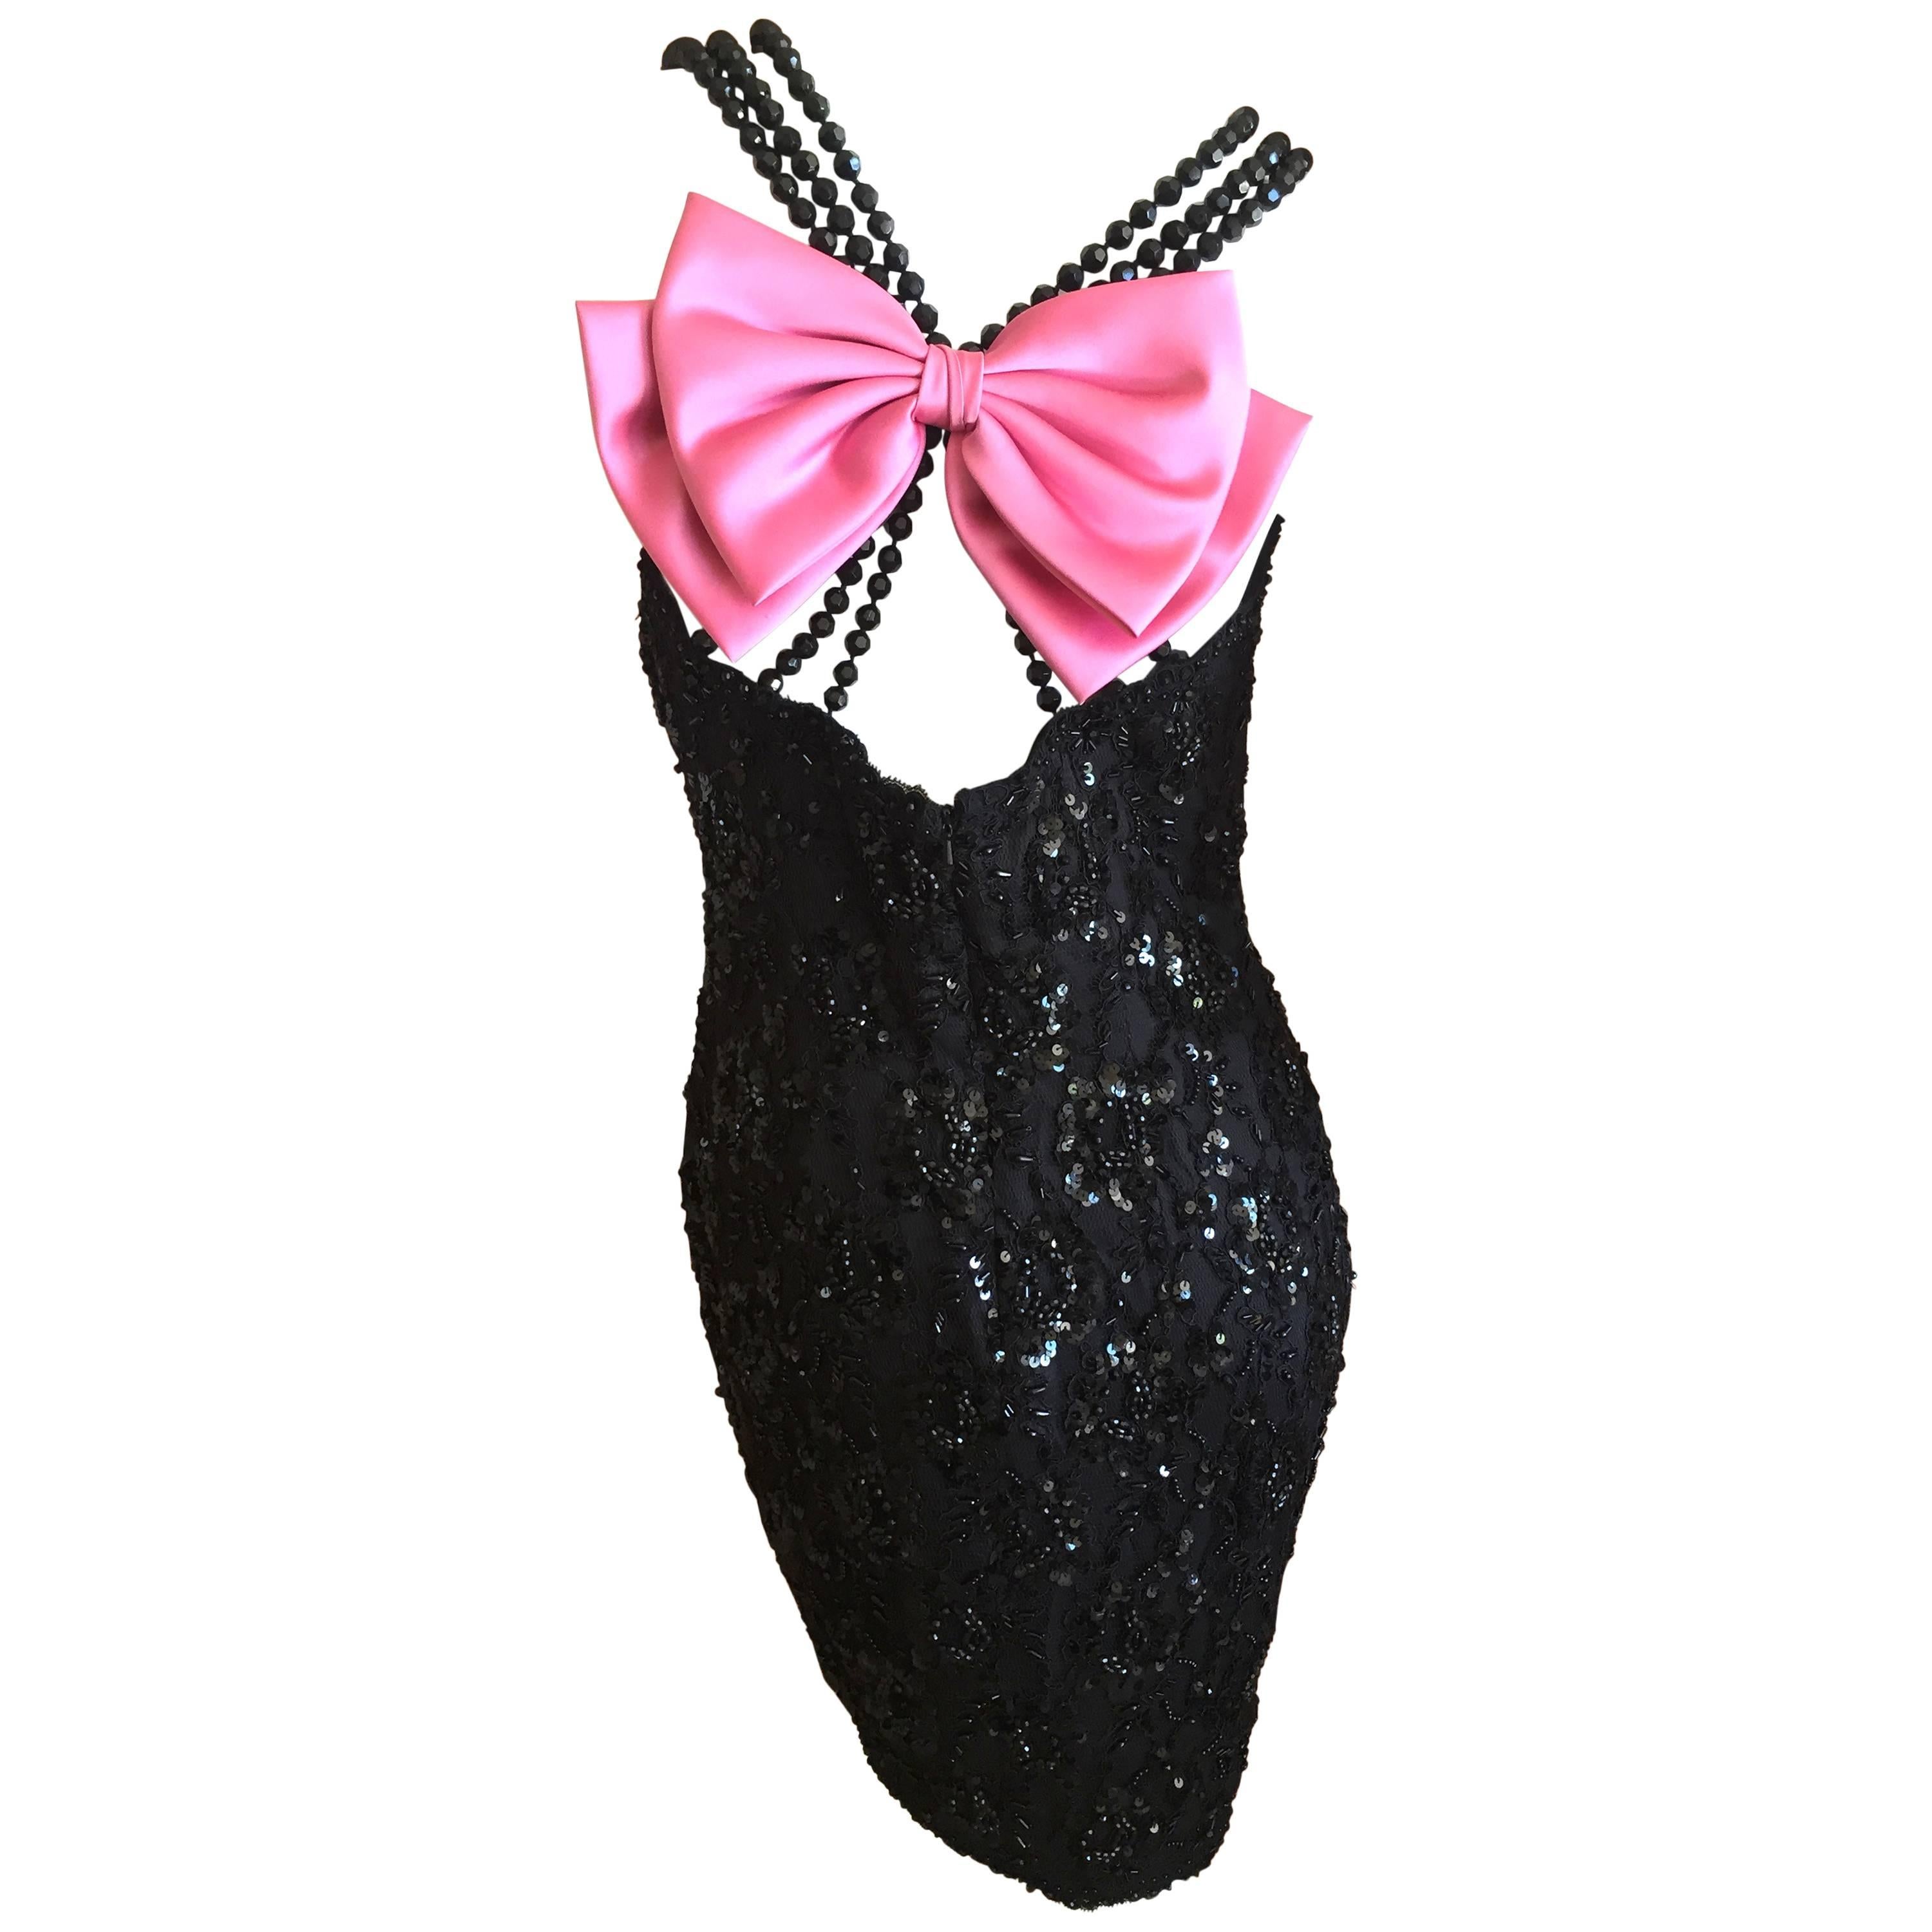 Oscar de la Renta 1980's Sequin Cocktail Dress with Beads and Bow